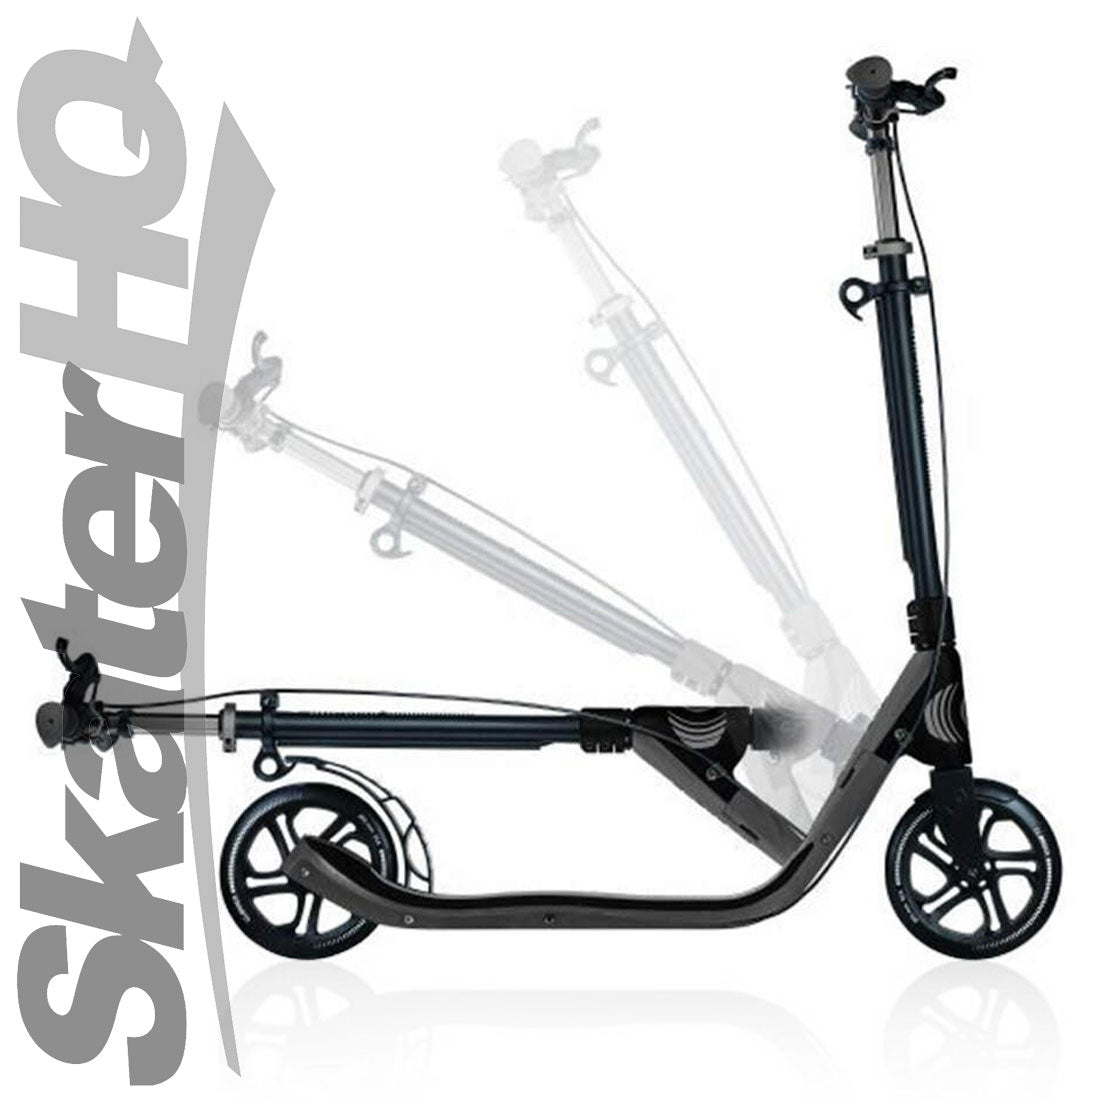 Globber ONE NL 205 Deluxe Scooter - Charcoal Grey Scooter Completes Rec